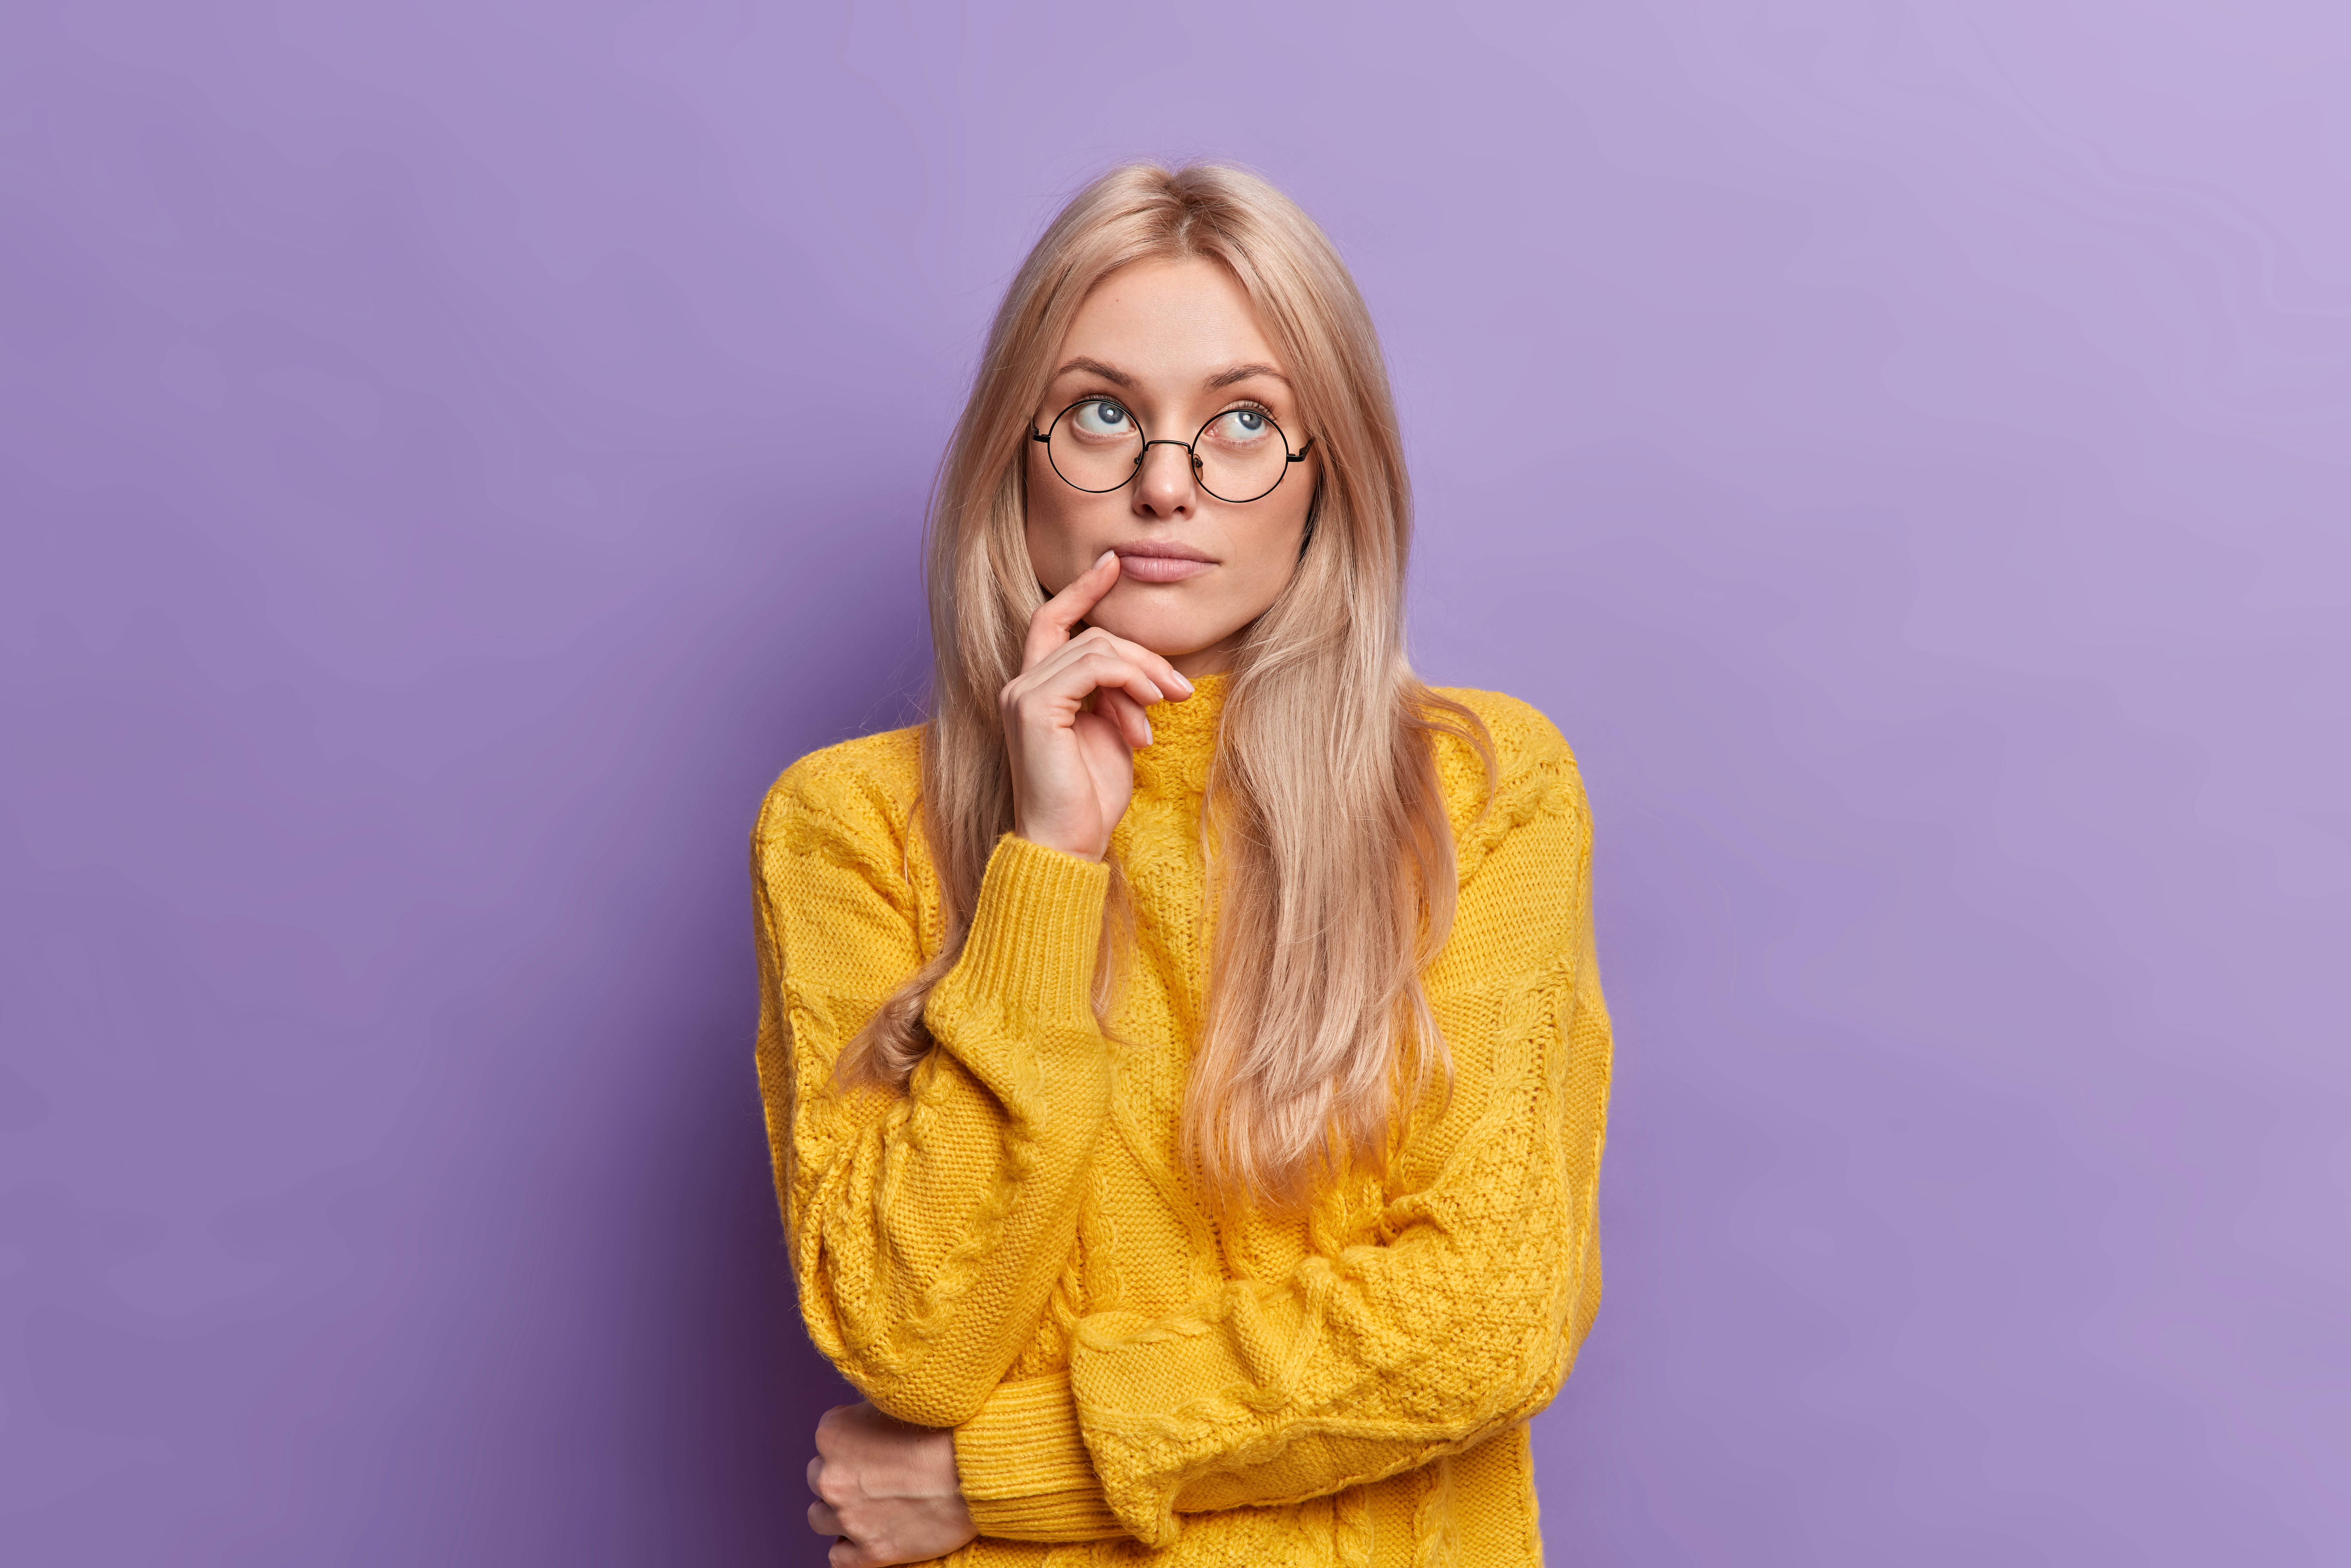 Young pretty young woman thinks of ideas concentrated above stands thoughtful and keeps hand on face stands in thoughtful pose wears round glasses yellow sweater isolated over purple background.